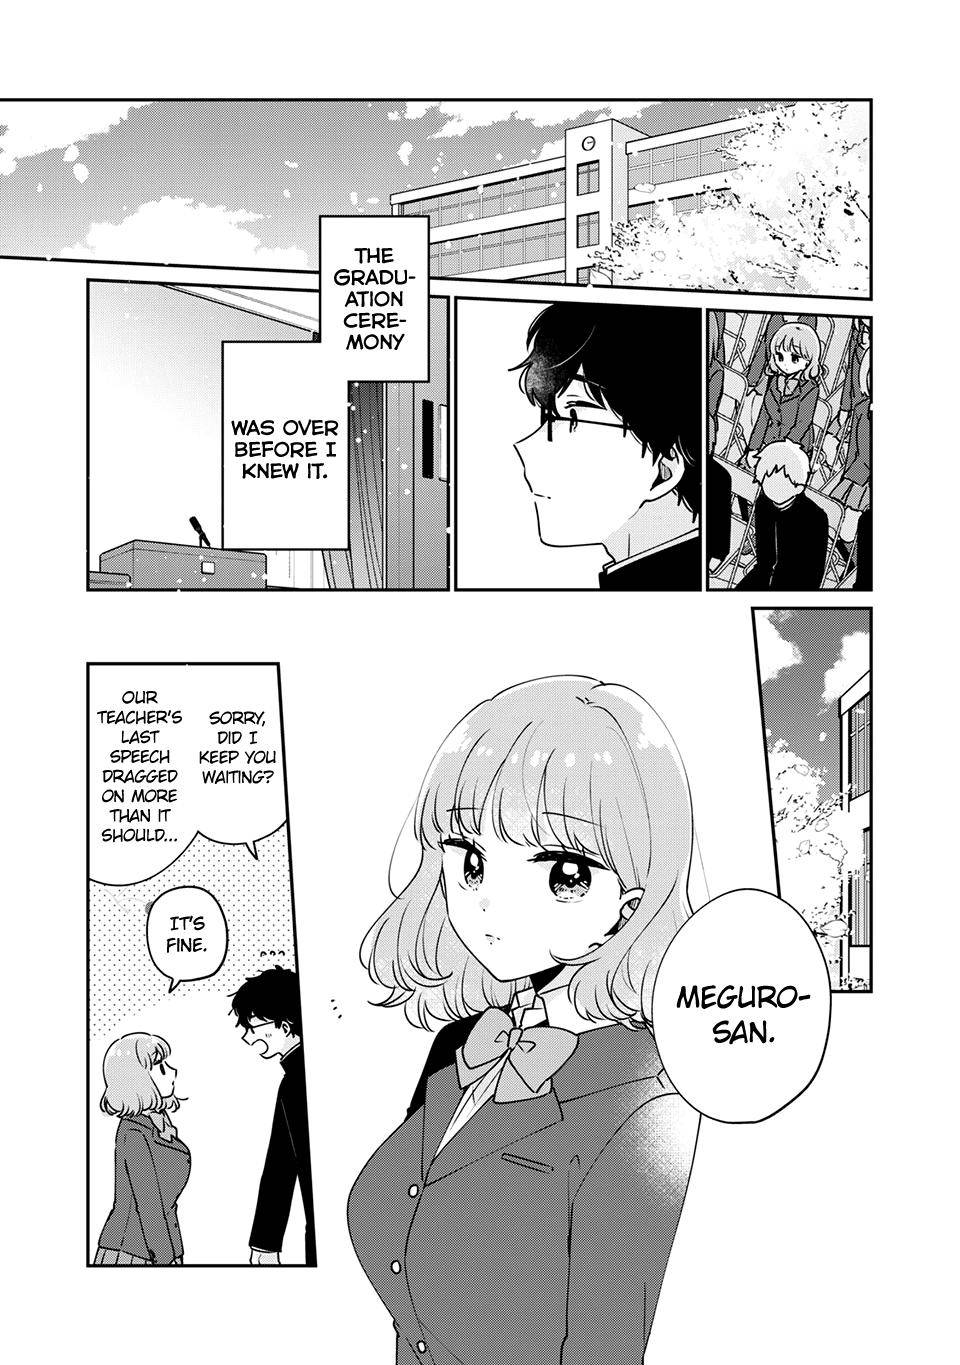 It's Not Meguro-san's First Time chapter 47 page 2